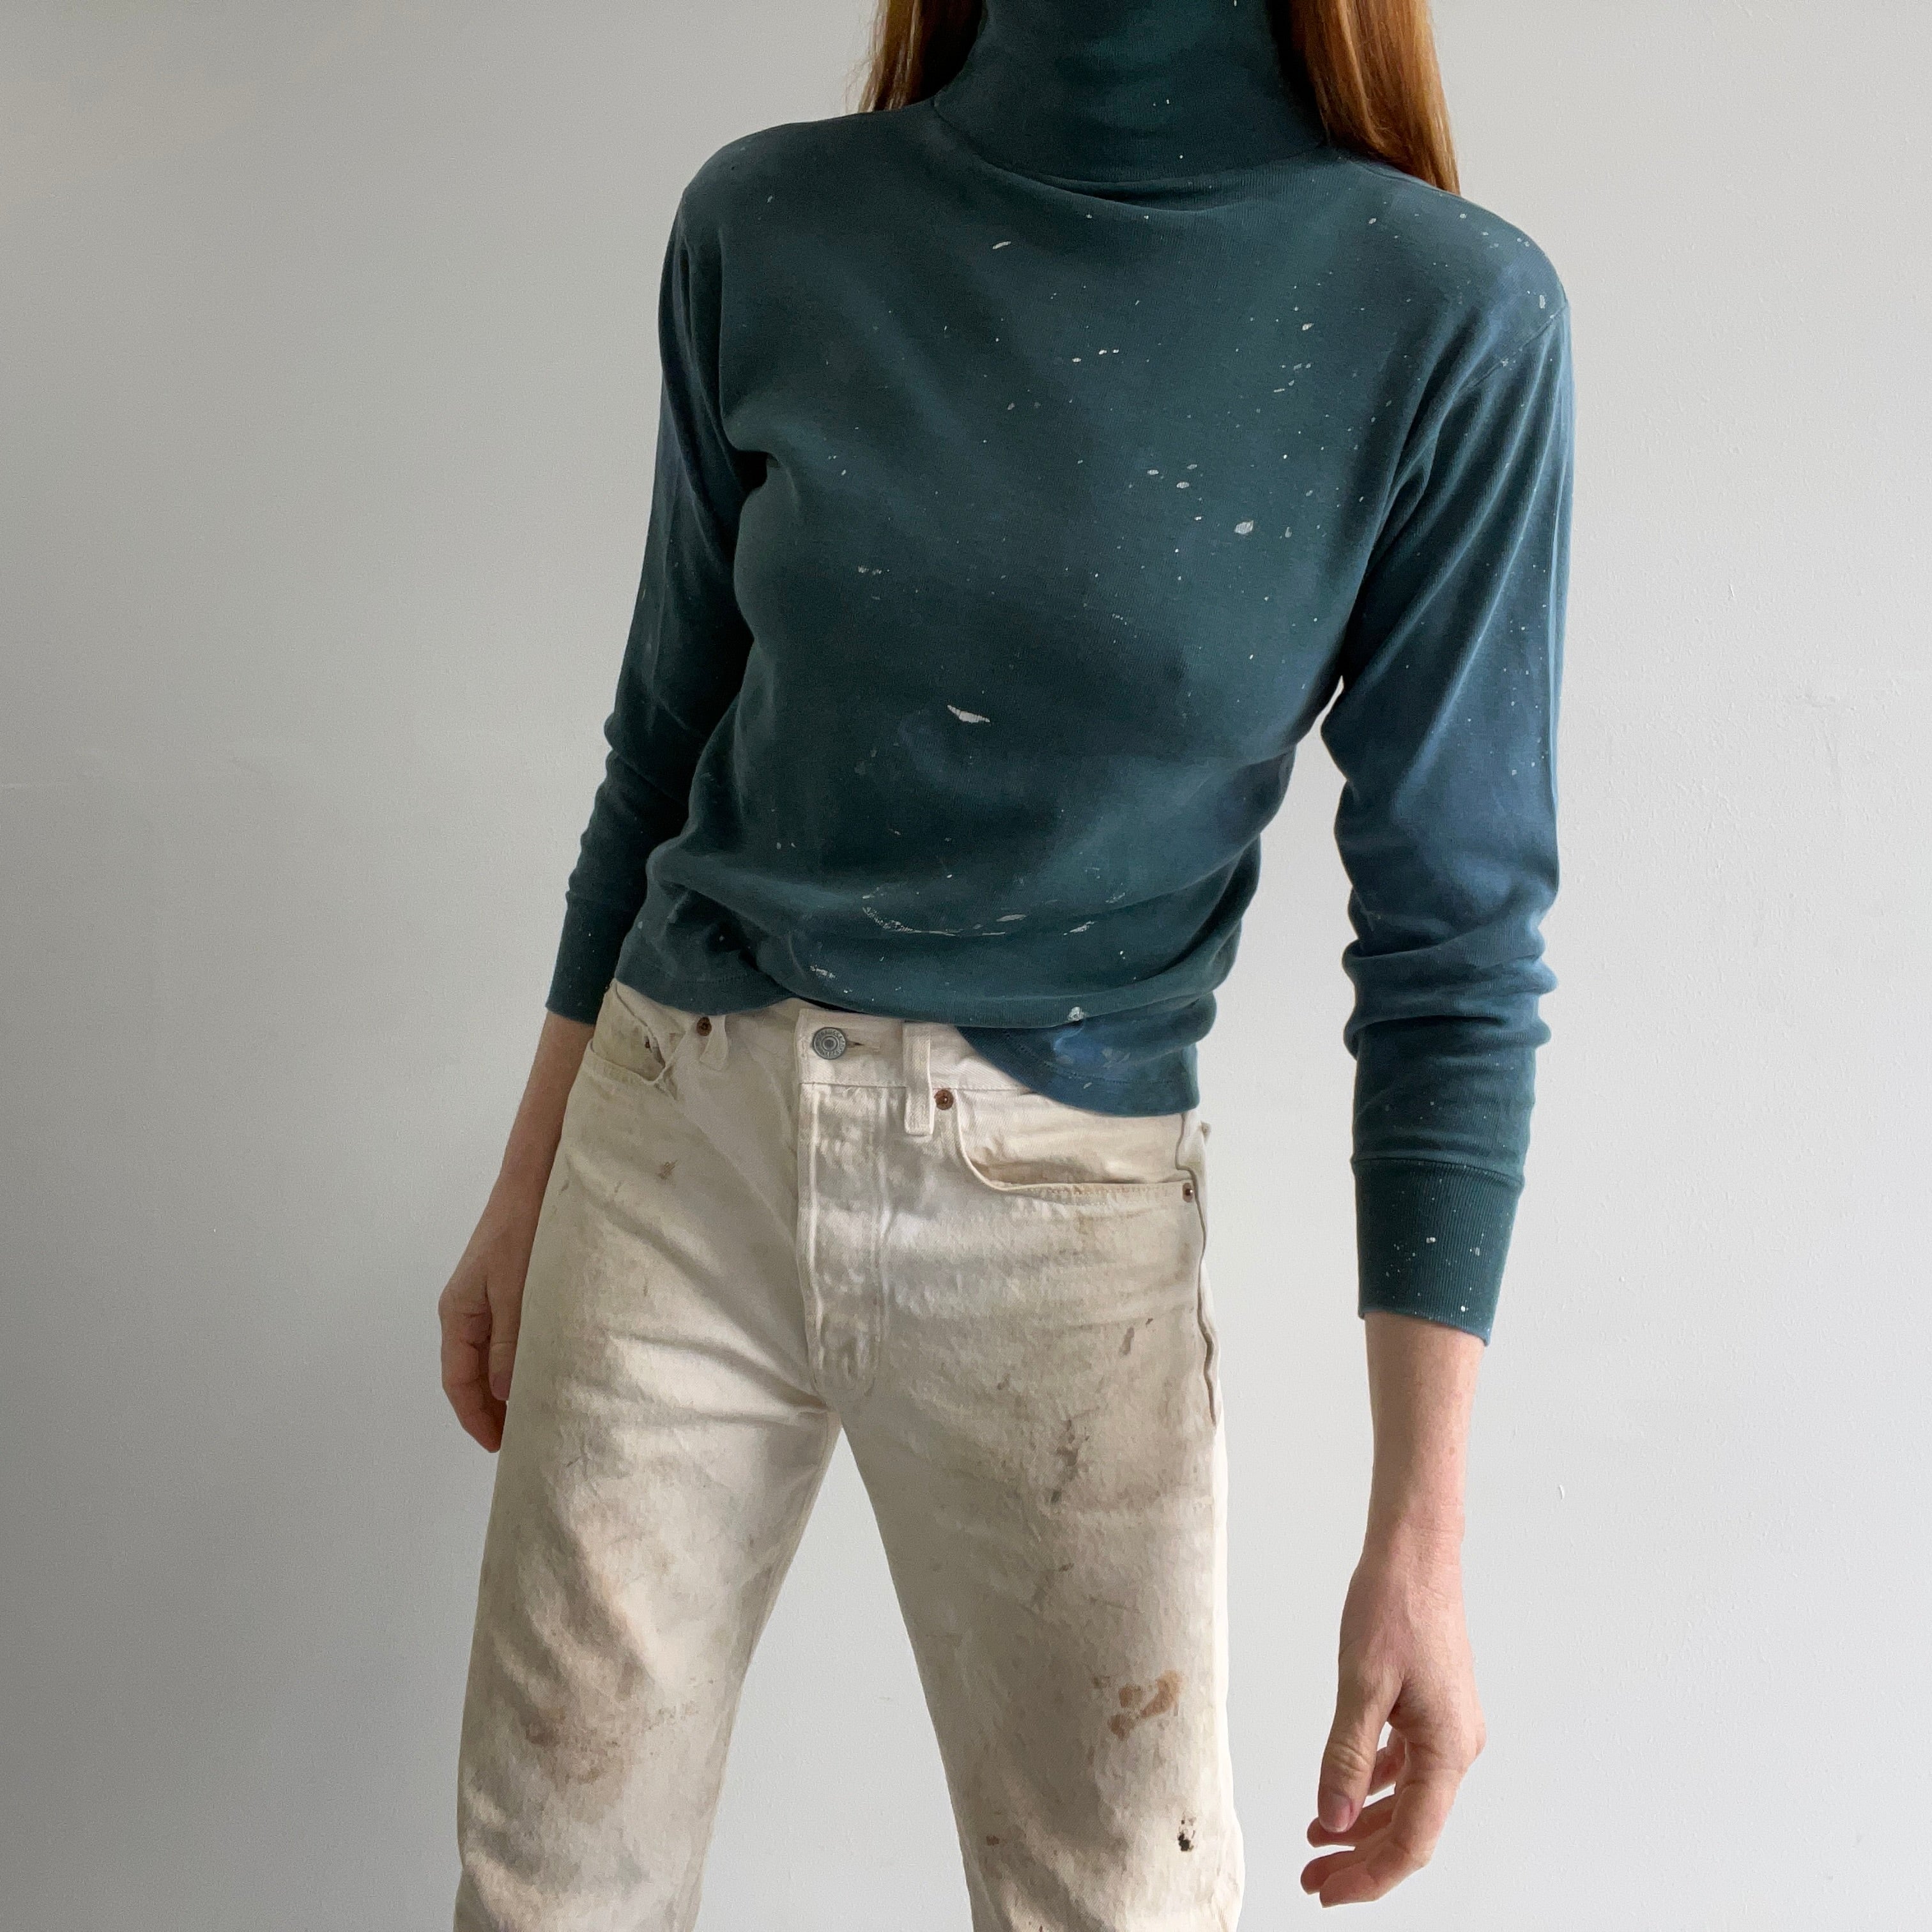 1970s SUPER Paint Stained Smaller Forest Green Cotton Turtleneck